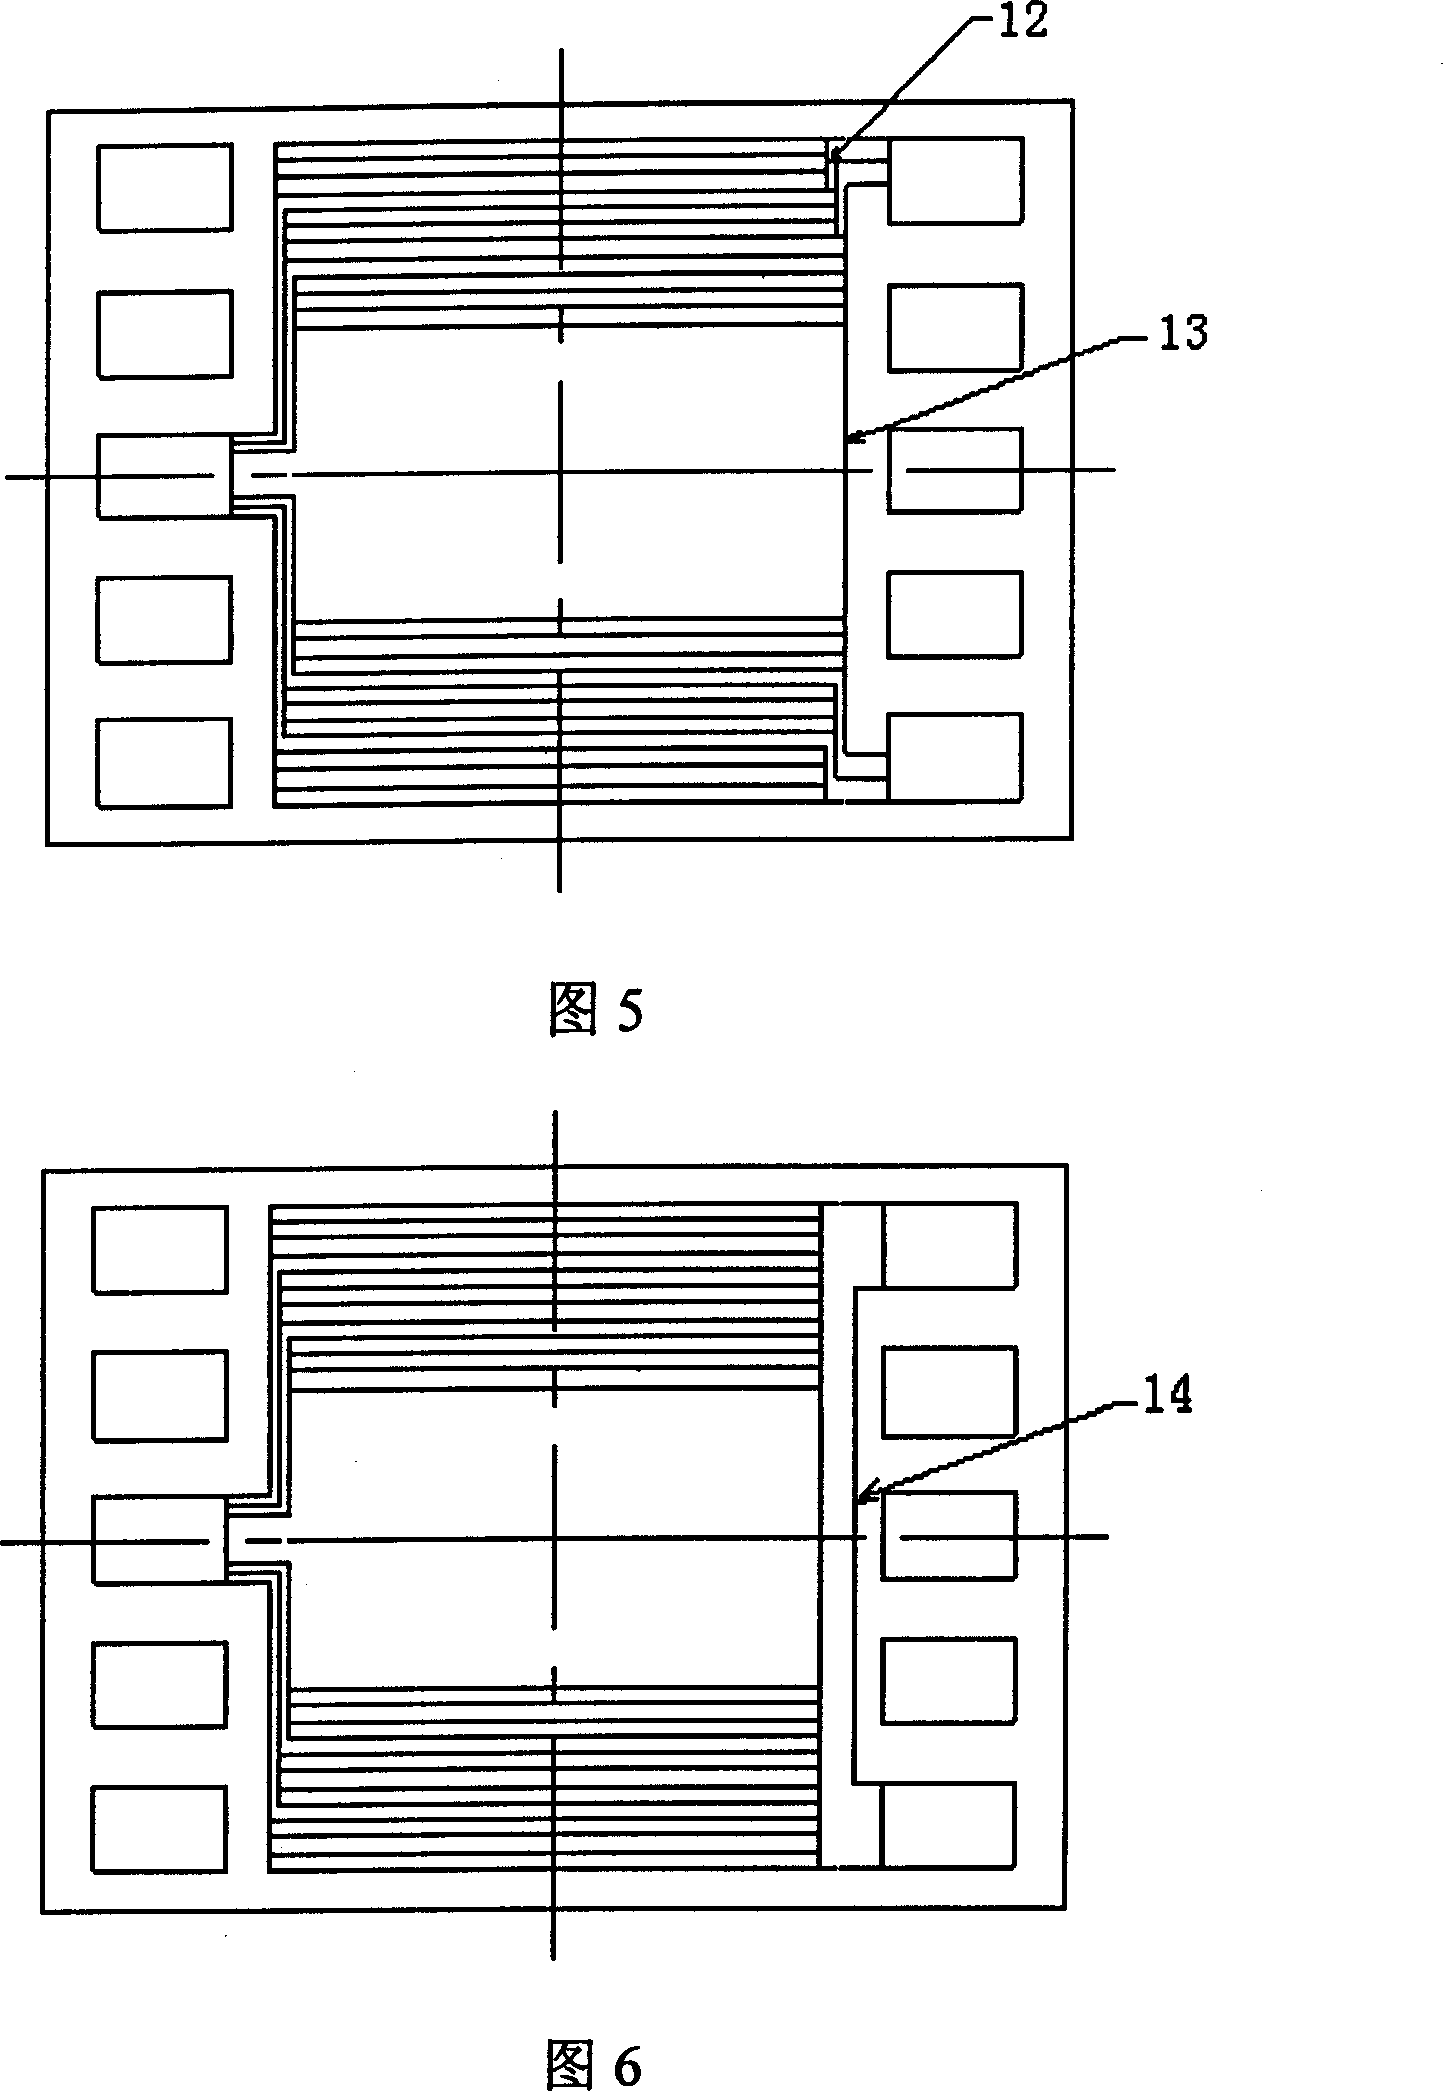 A fuel battery flow guiding polarized plate without water blockage